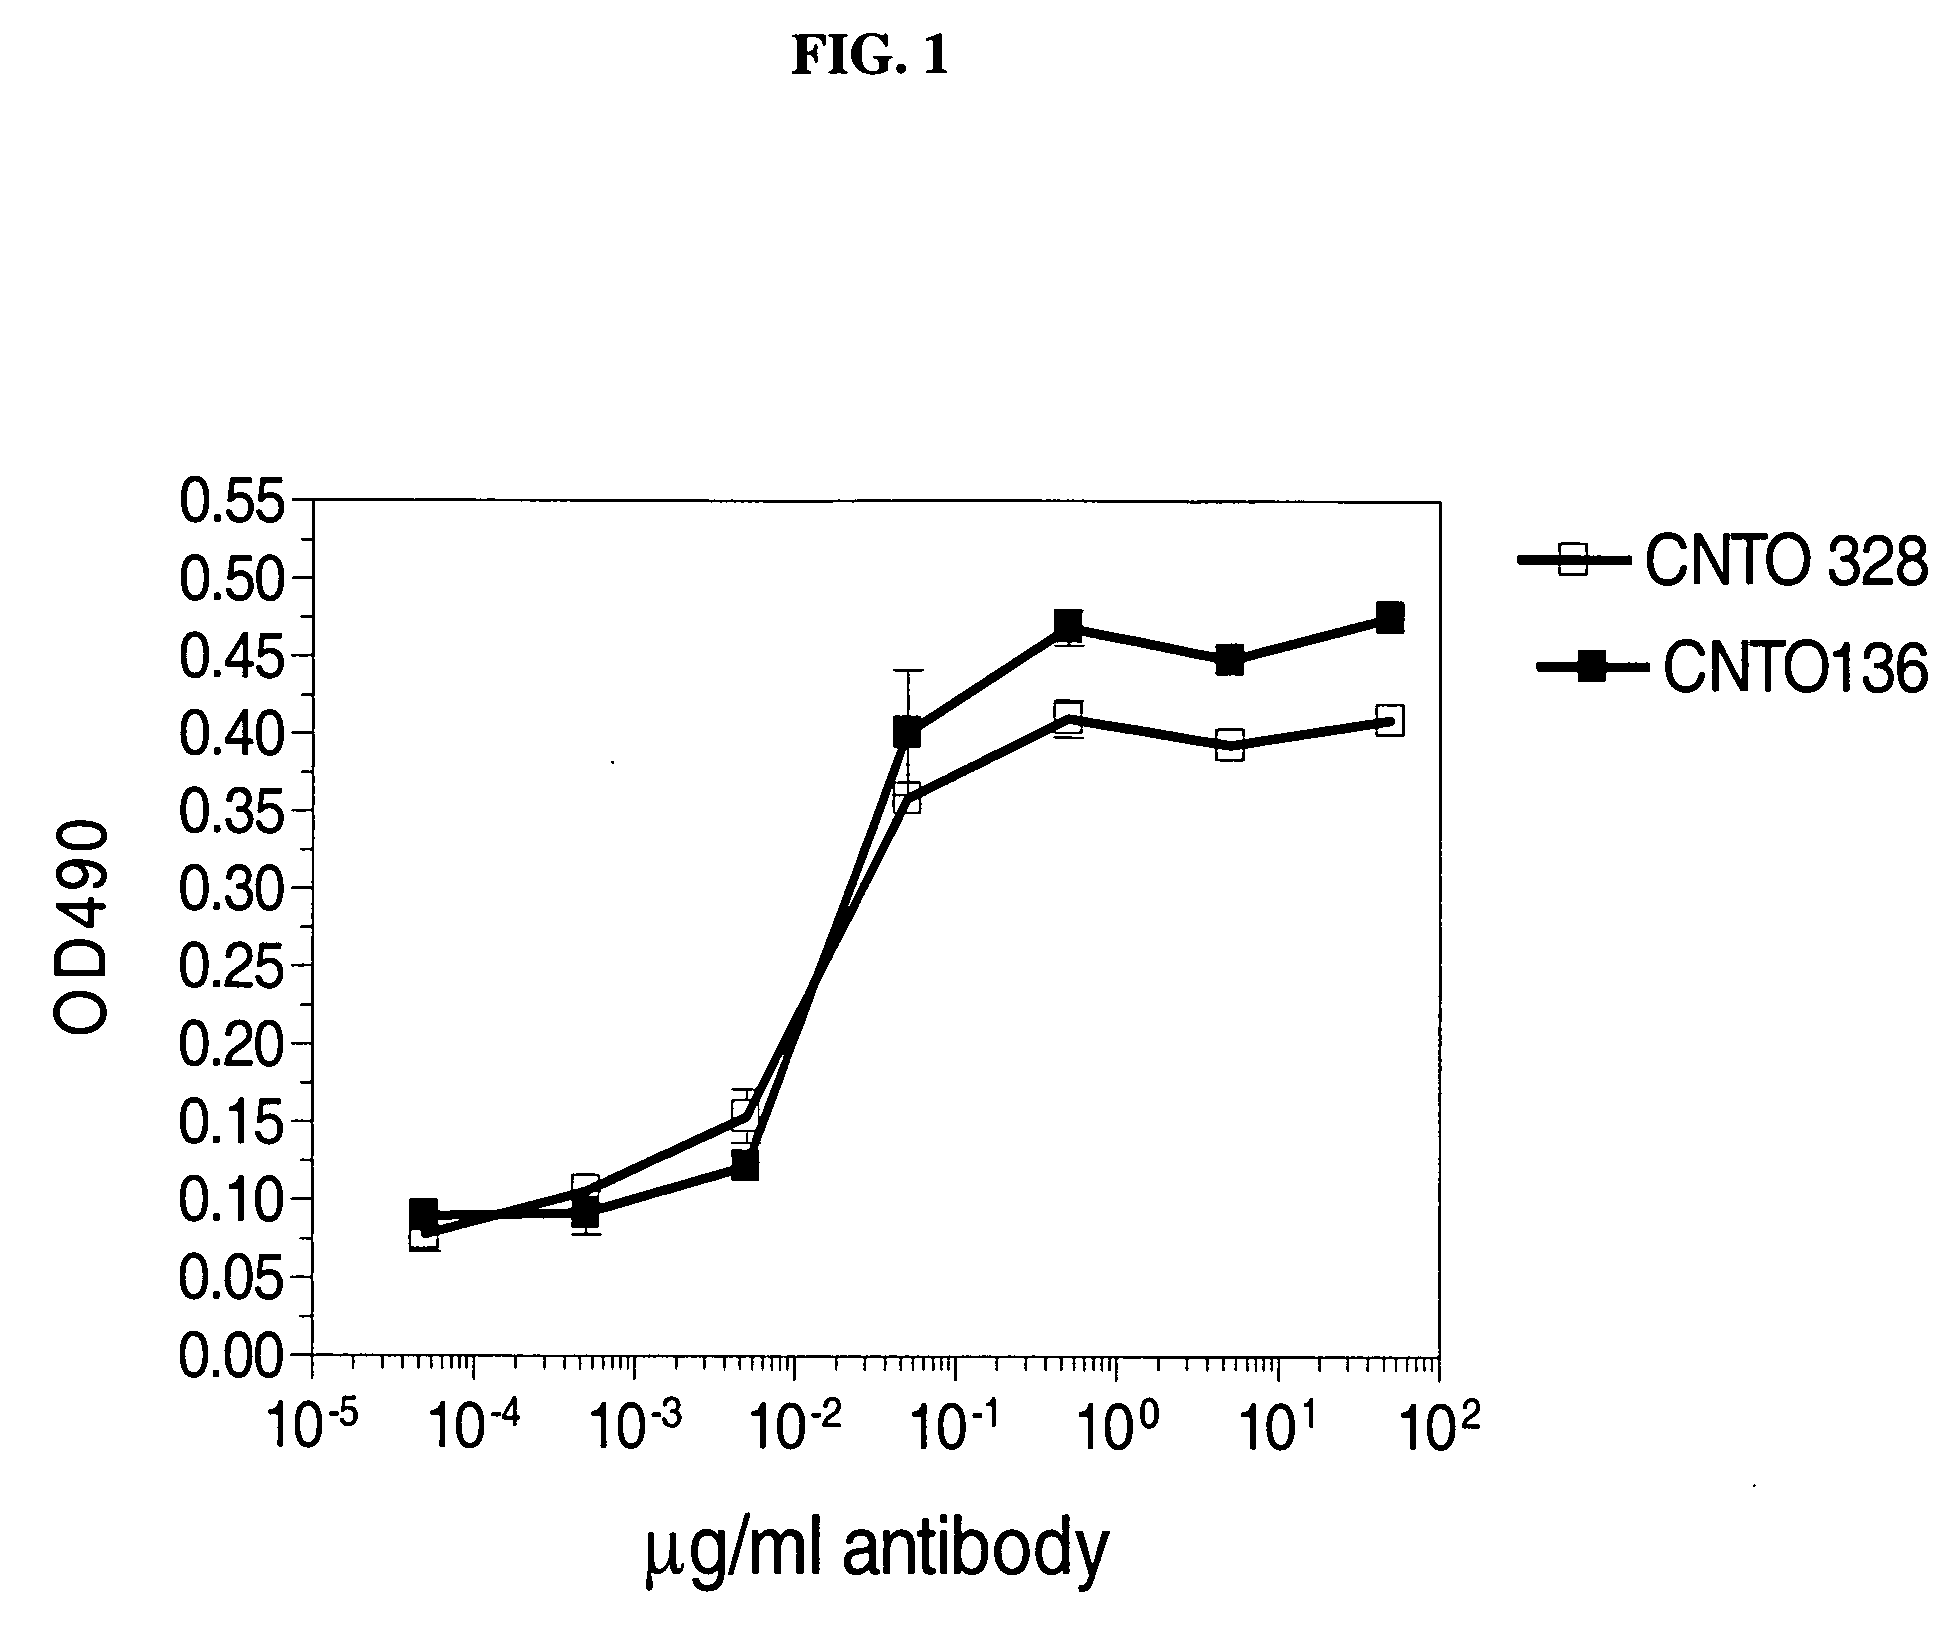 Anti-IL-6 antibodies, compositions, methods and uses